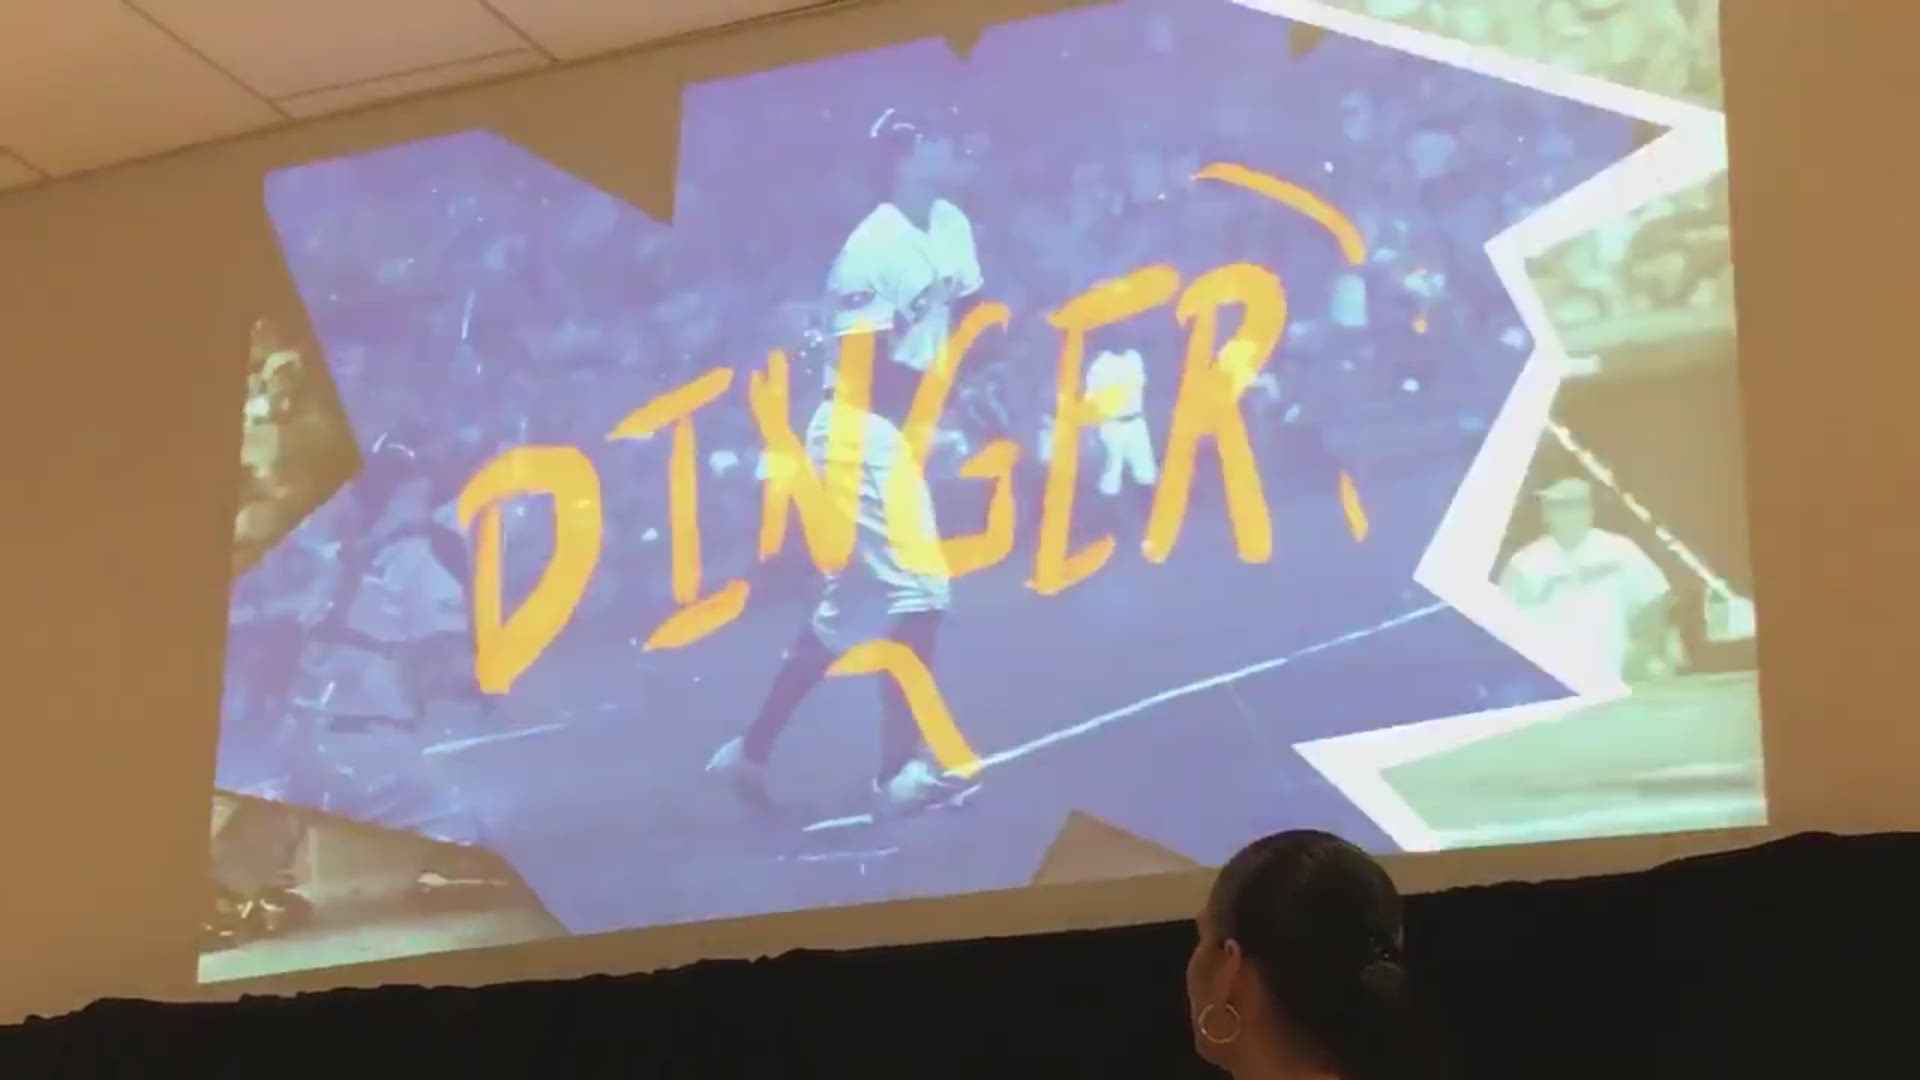 Video courtesy of the Astros. What do you think of the 2023 slogan